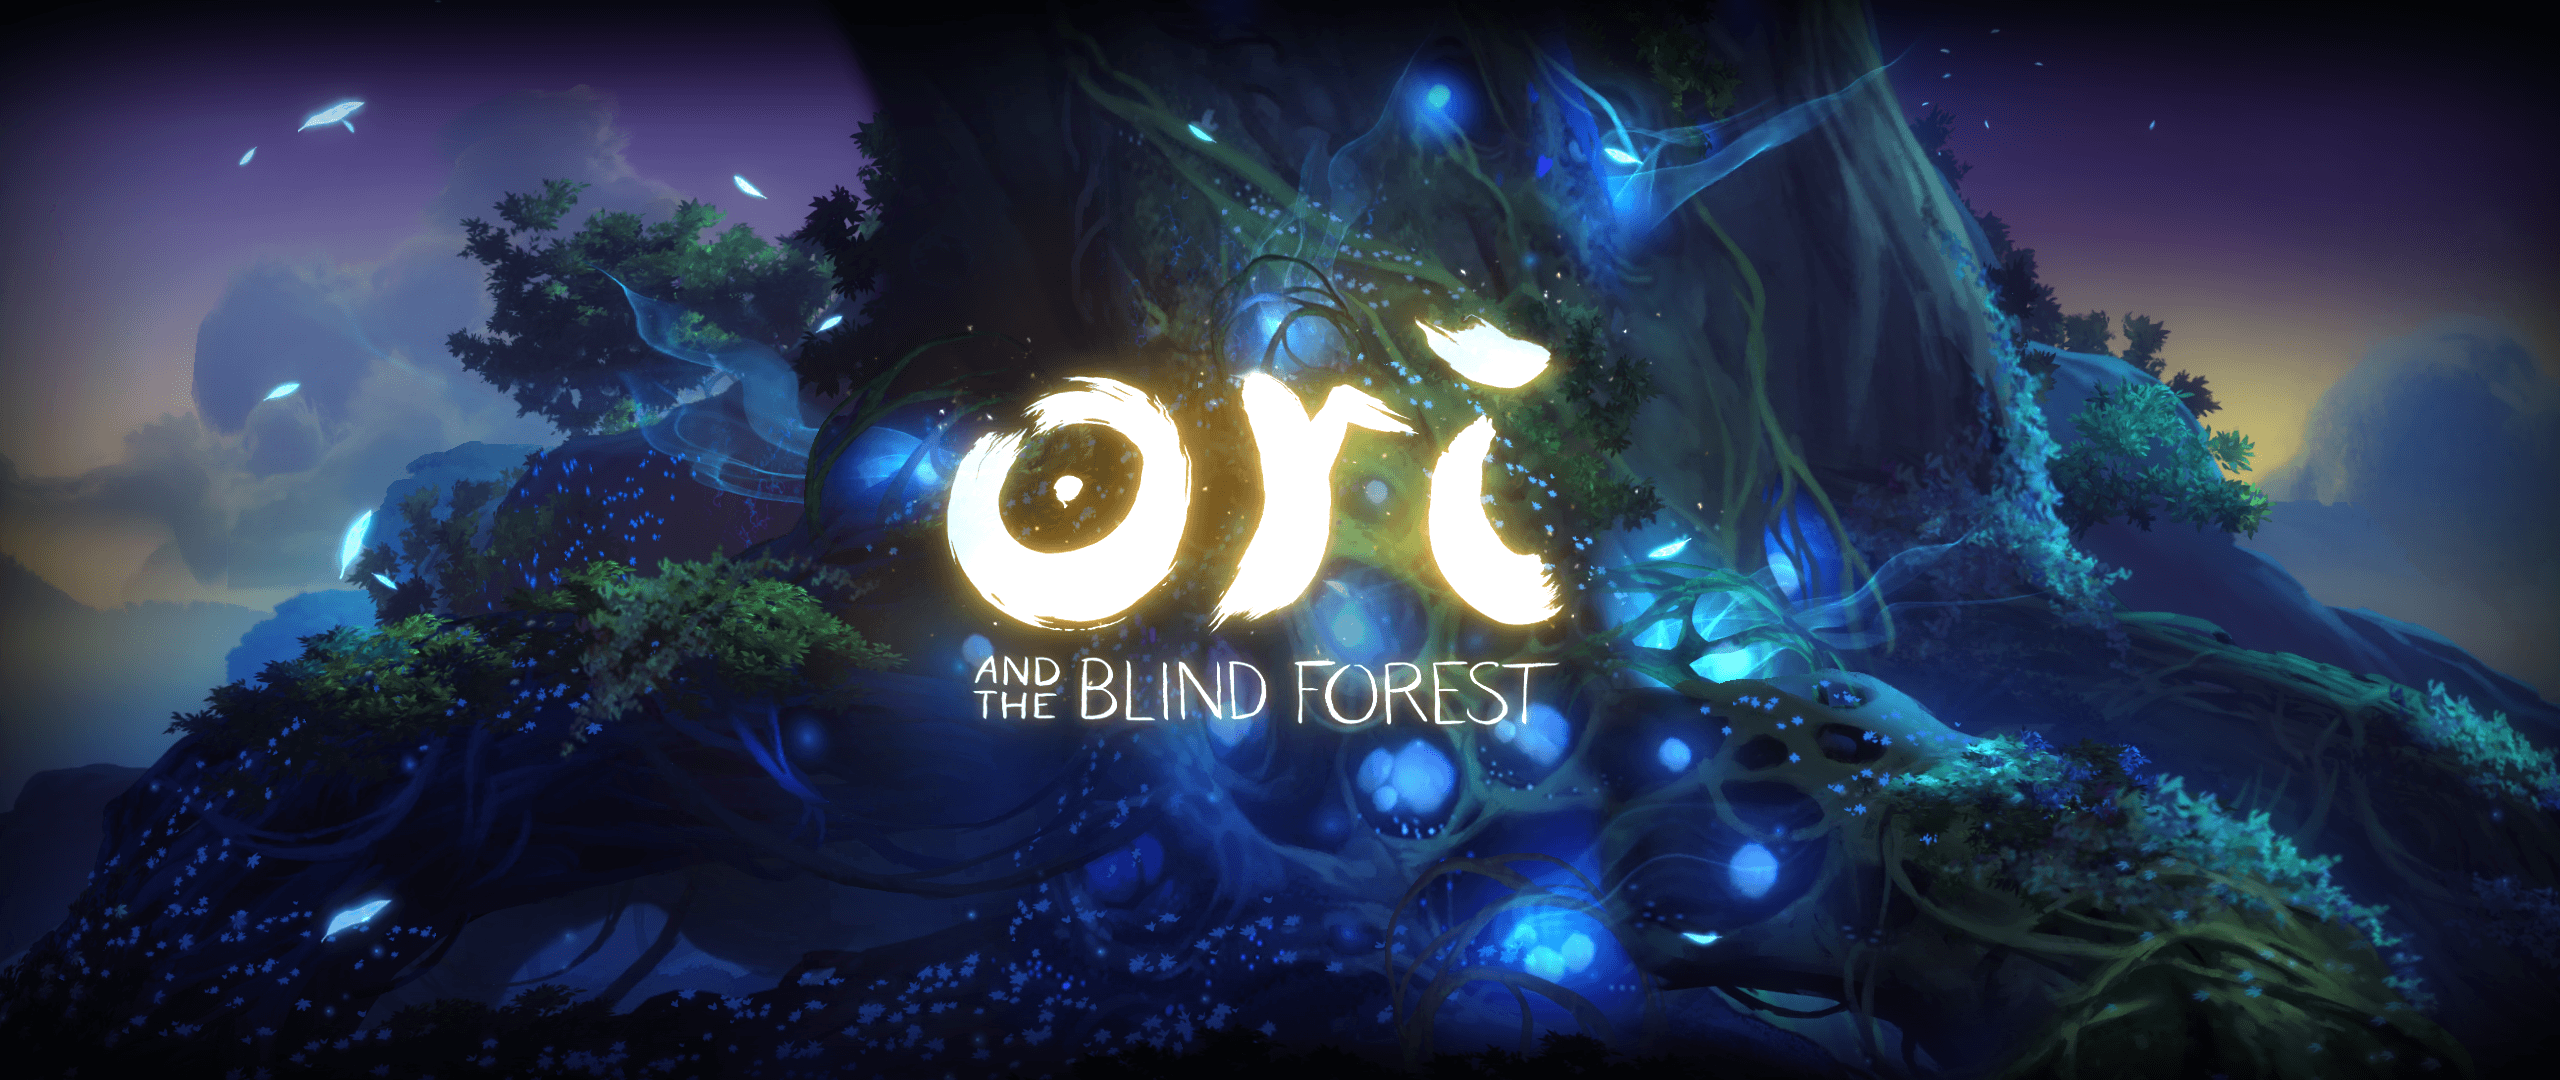 Just finished Ori and the Blind Forest. The Definitive Edition is